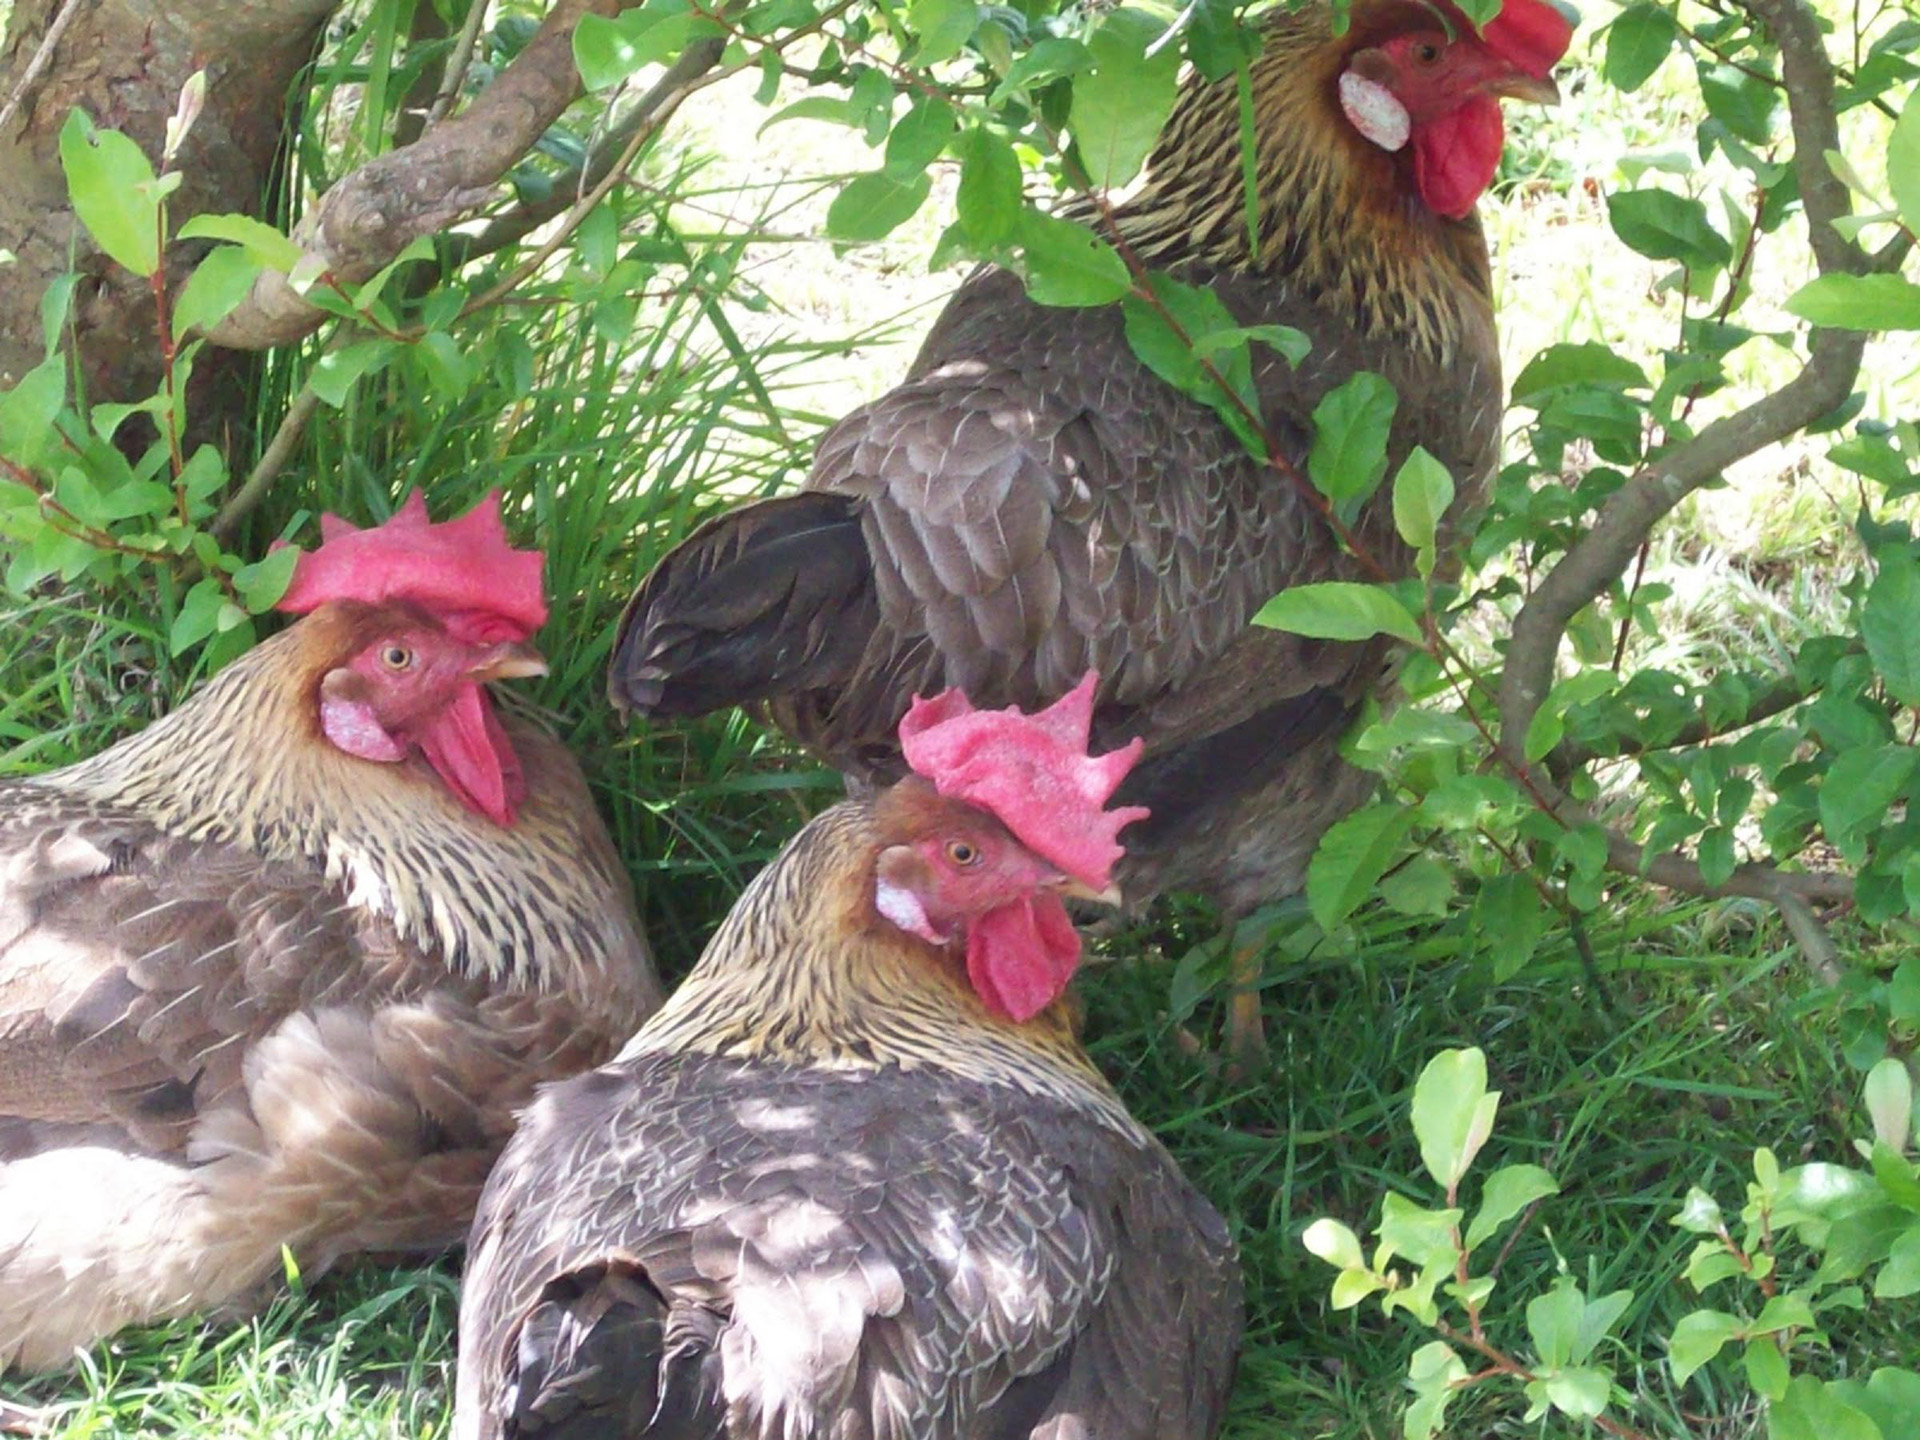 Heat Stress and Keeping Your Chickens Cool